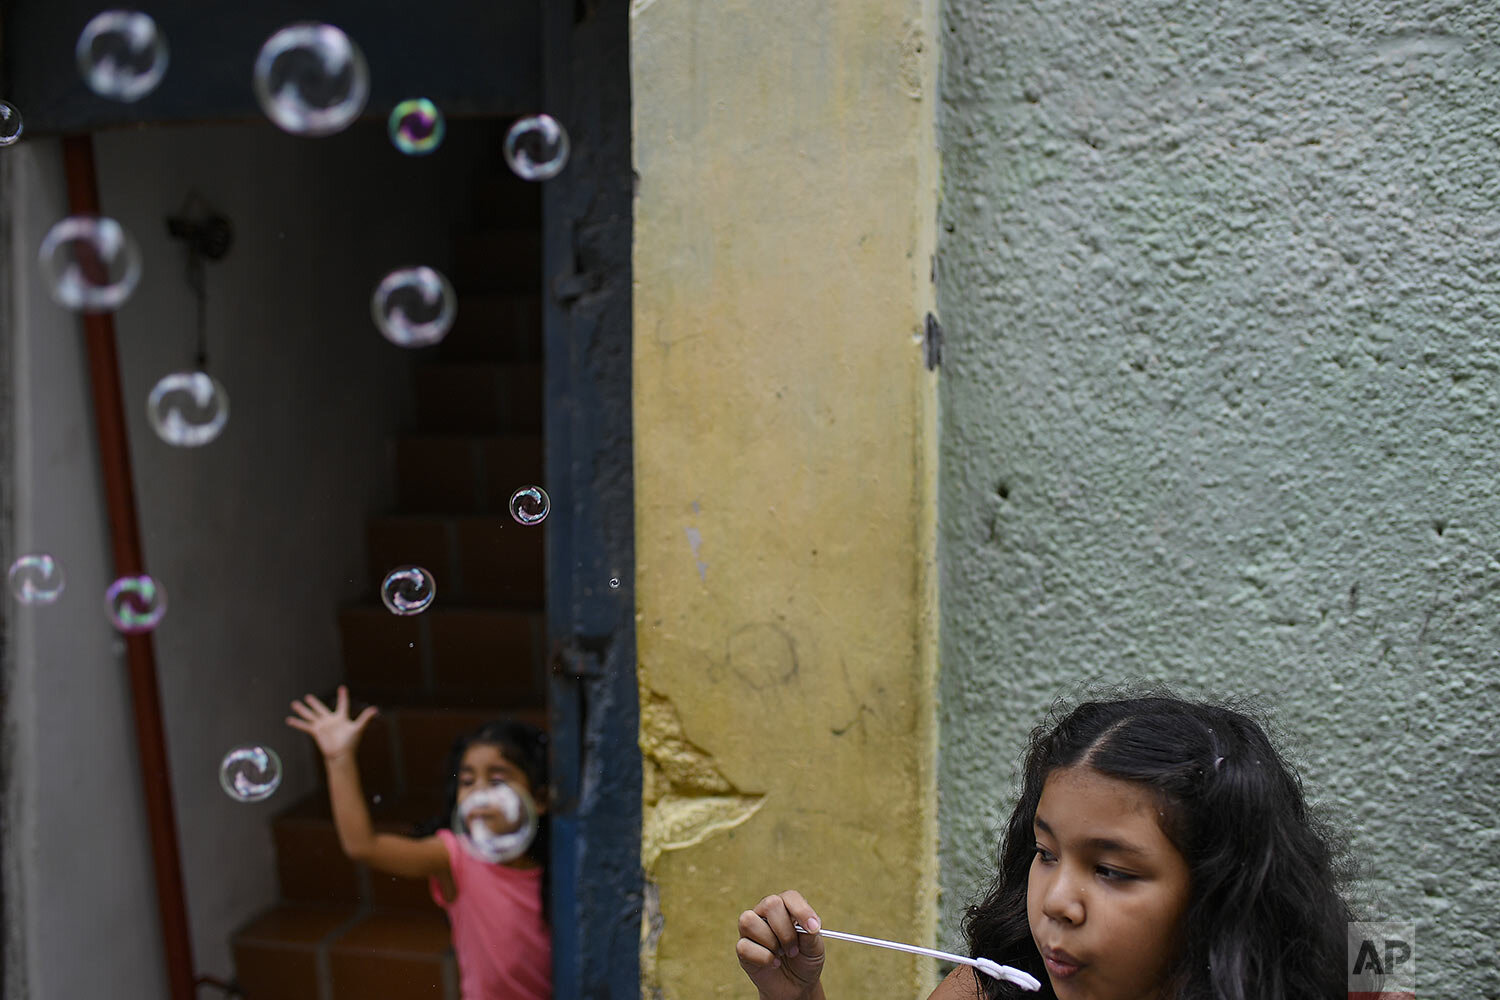  Sisters play with soap bubbles in the Catia neighborhood on Christmas Day in Caracas, Venezuela, Friday, Dec. 25, 2020, amid the new coronavirus pandemic. (AP Photo/Matias Delacroix) 